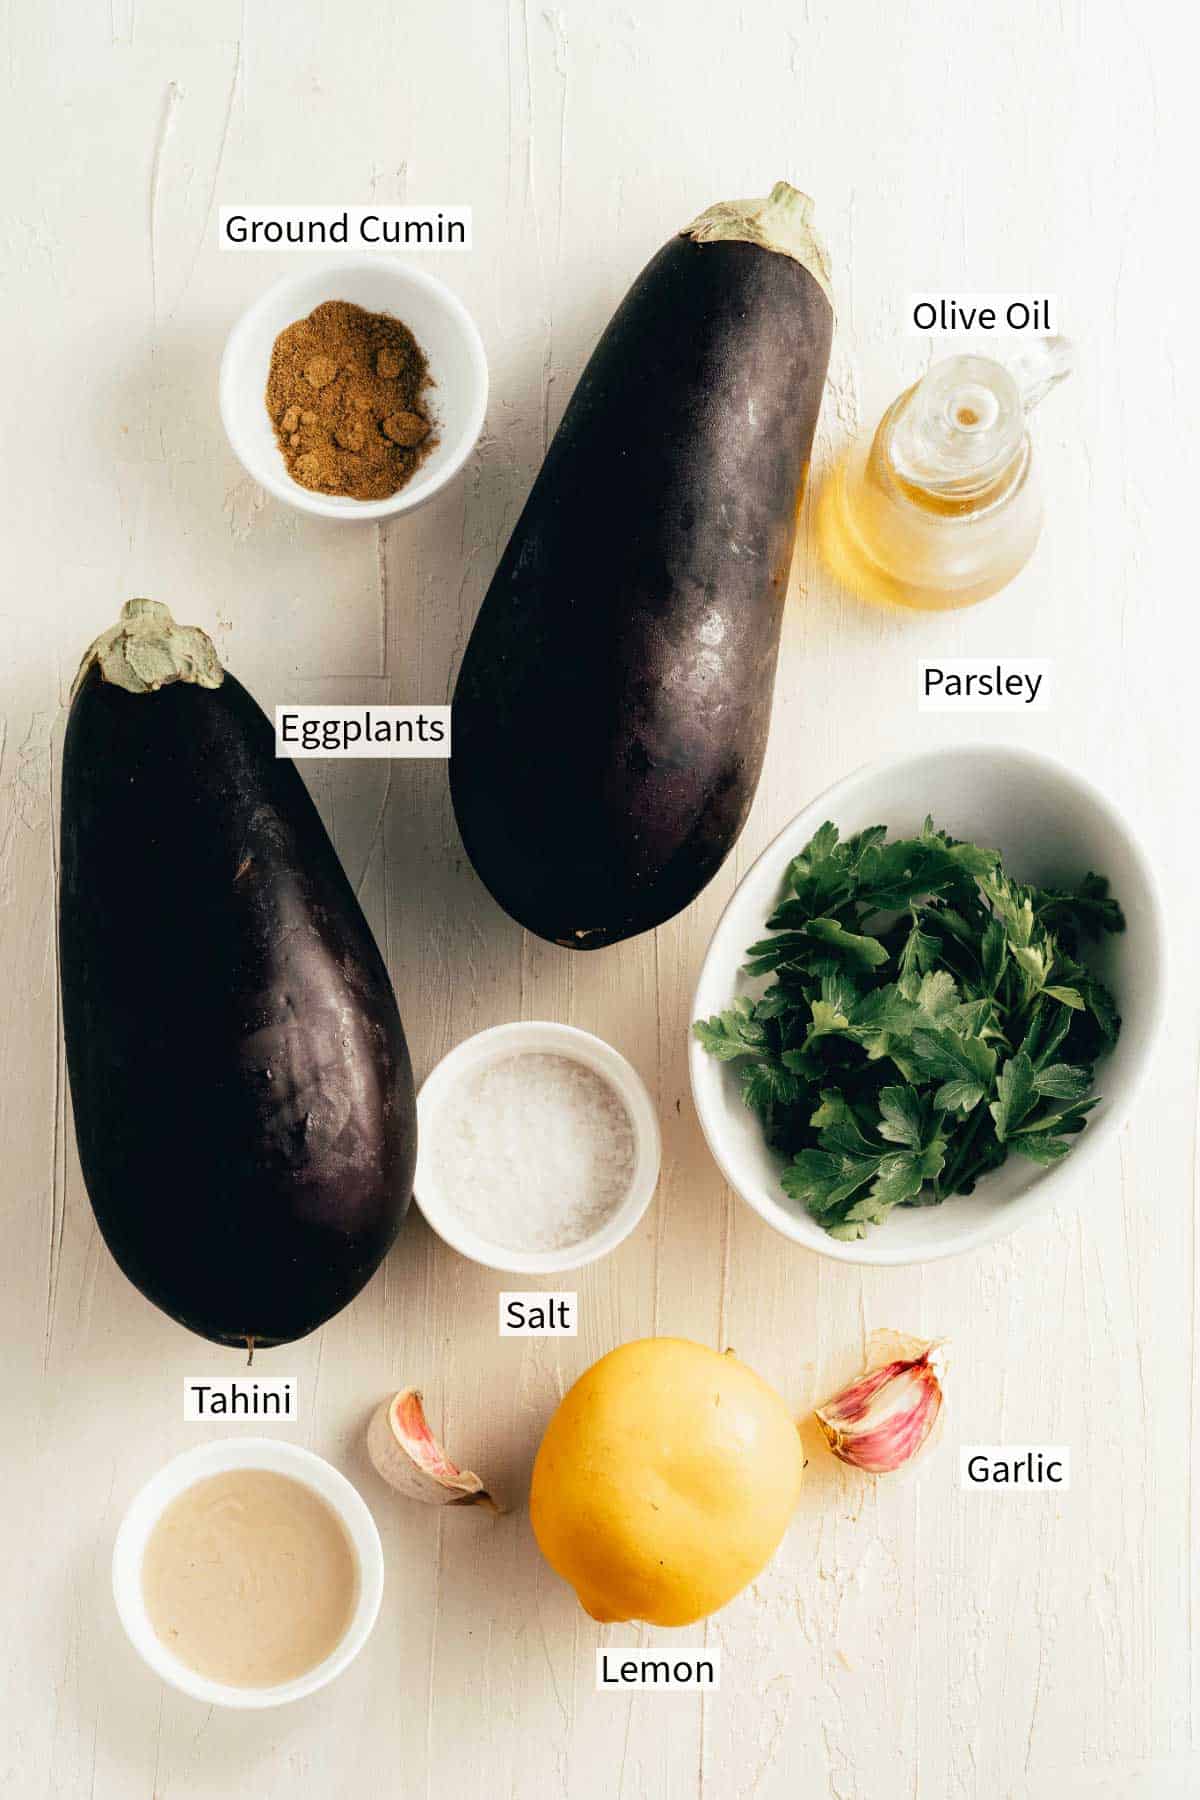 Ingredients for eggplant dip are arranged on a white surface.